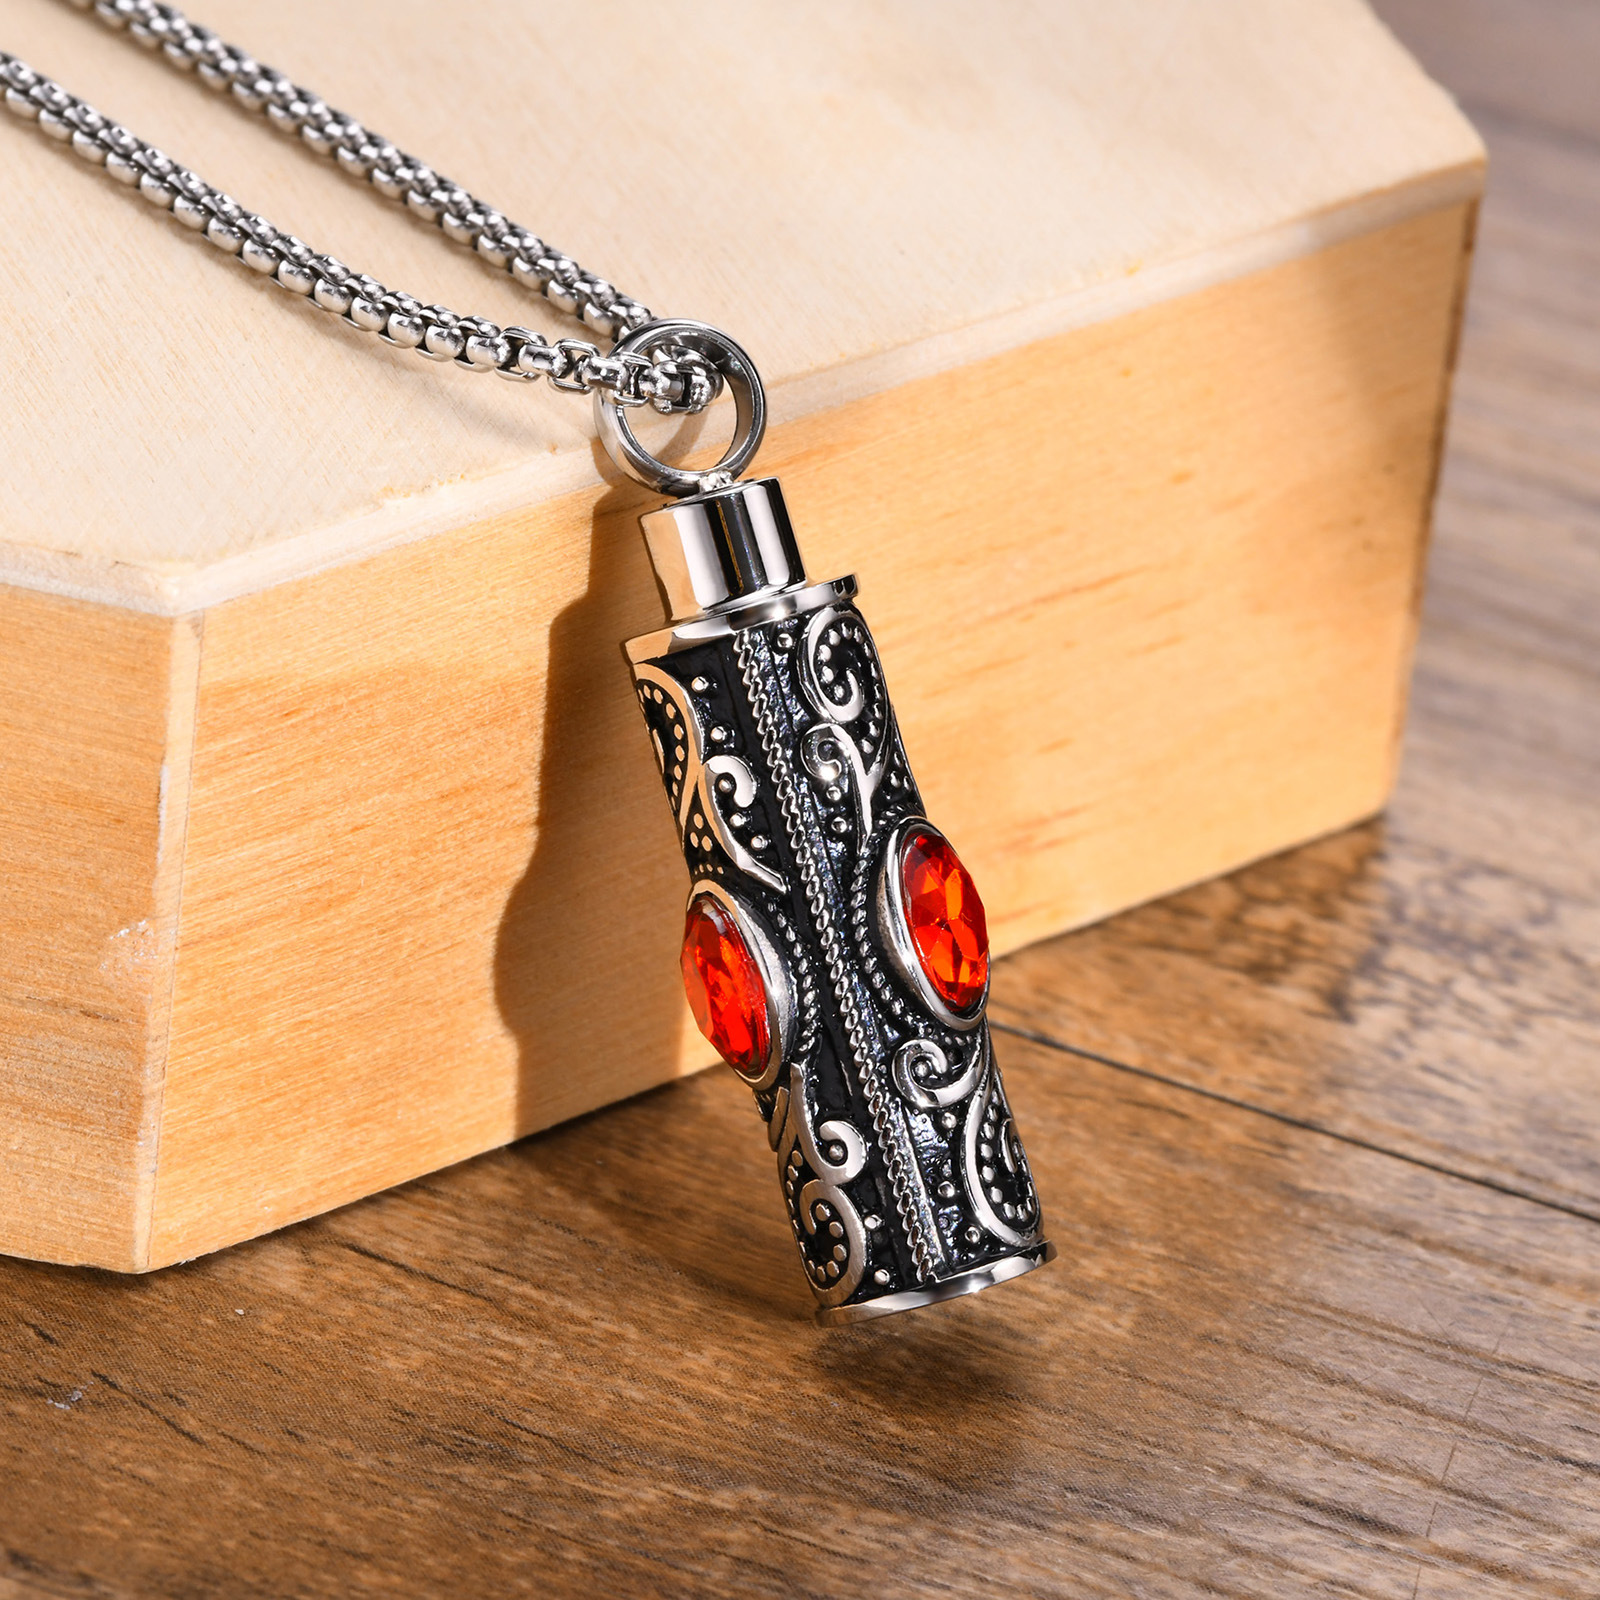 7:Red pendant necklace